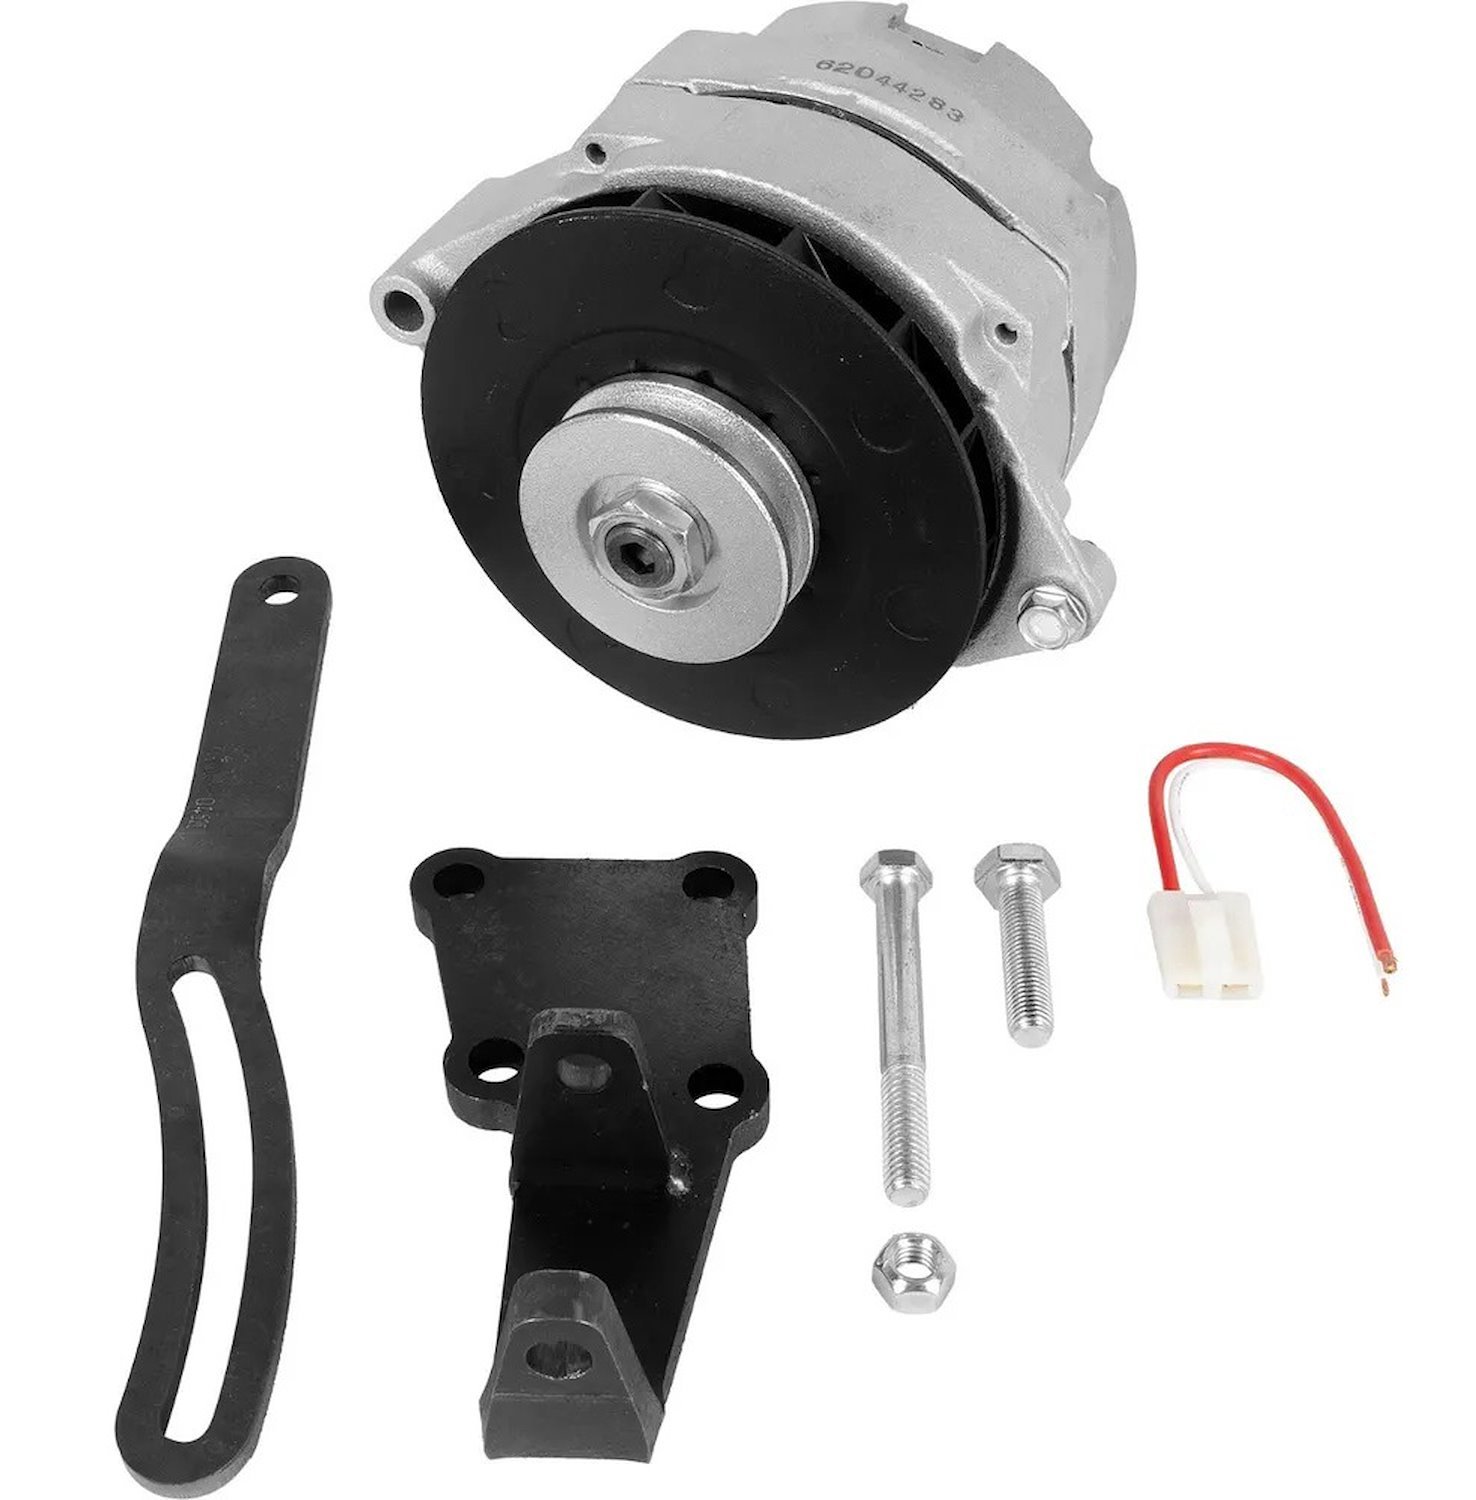 GM 3-Wire Alternator Kit with Bracket [78 AMP Output] for Select 1979-1995 Toyota Pickup, 4Runner 4-Cylinder Engines